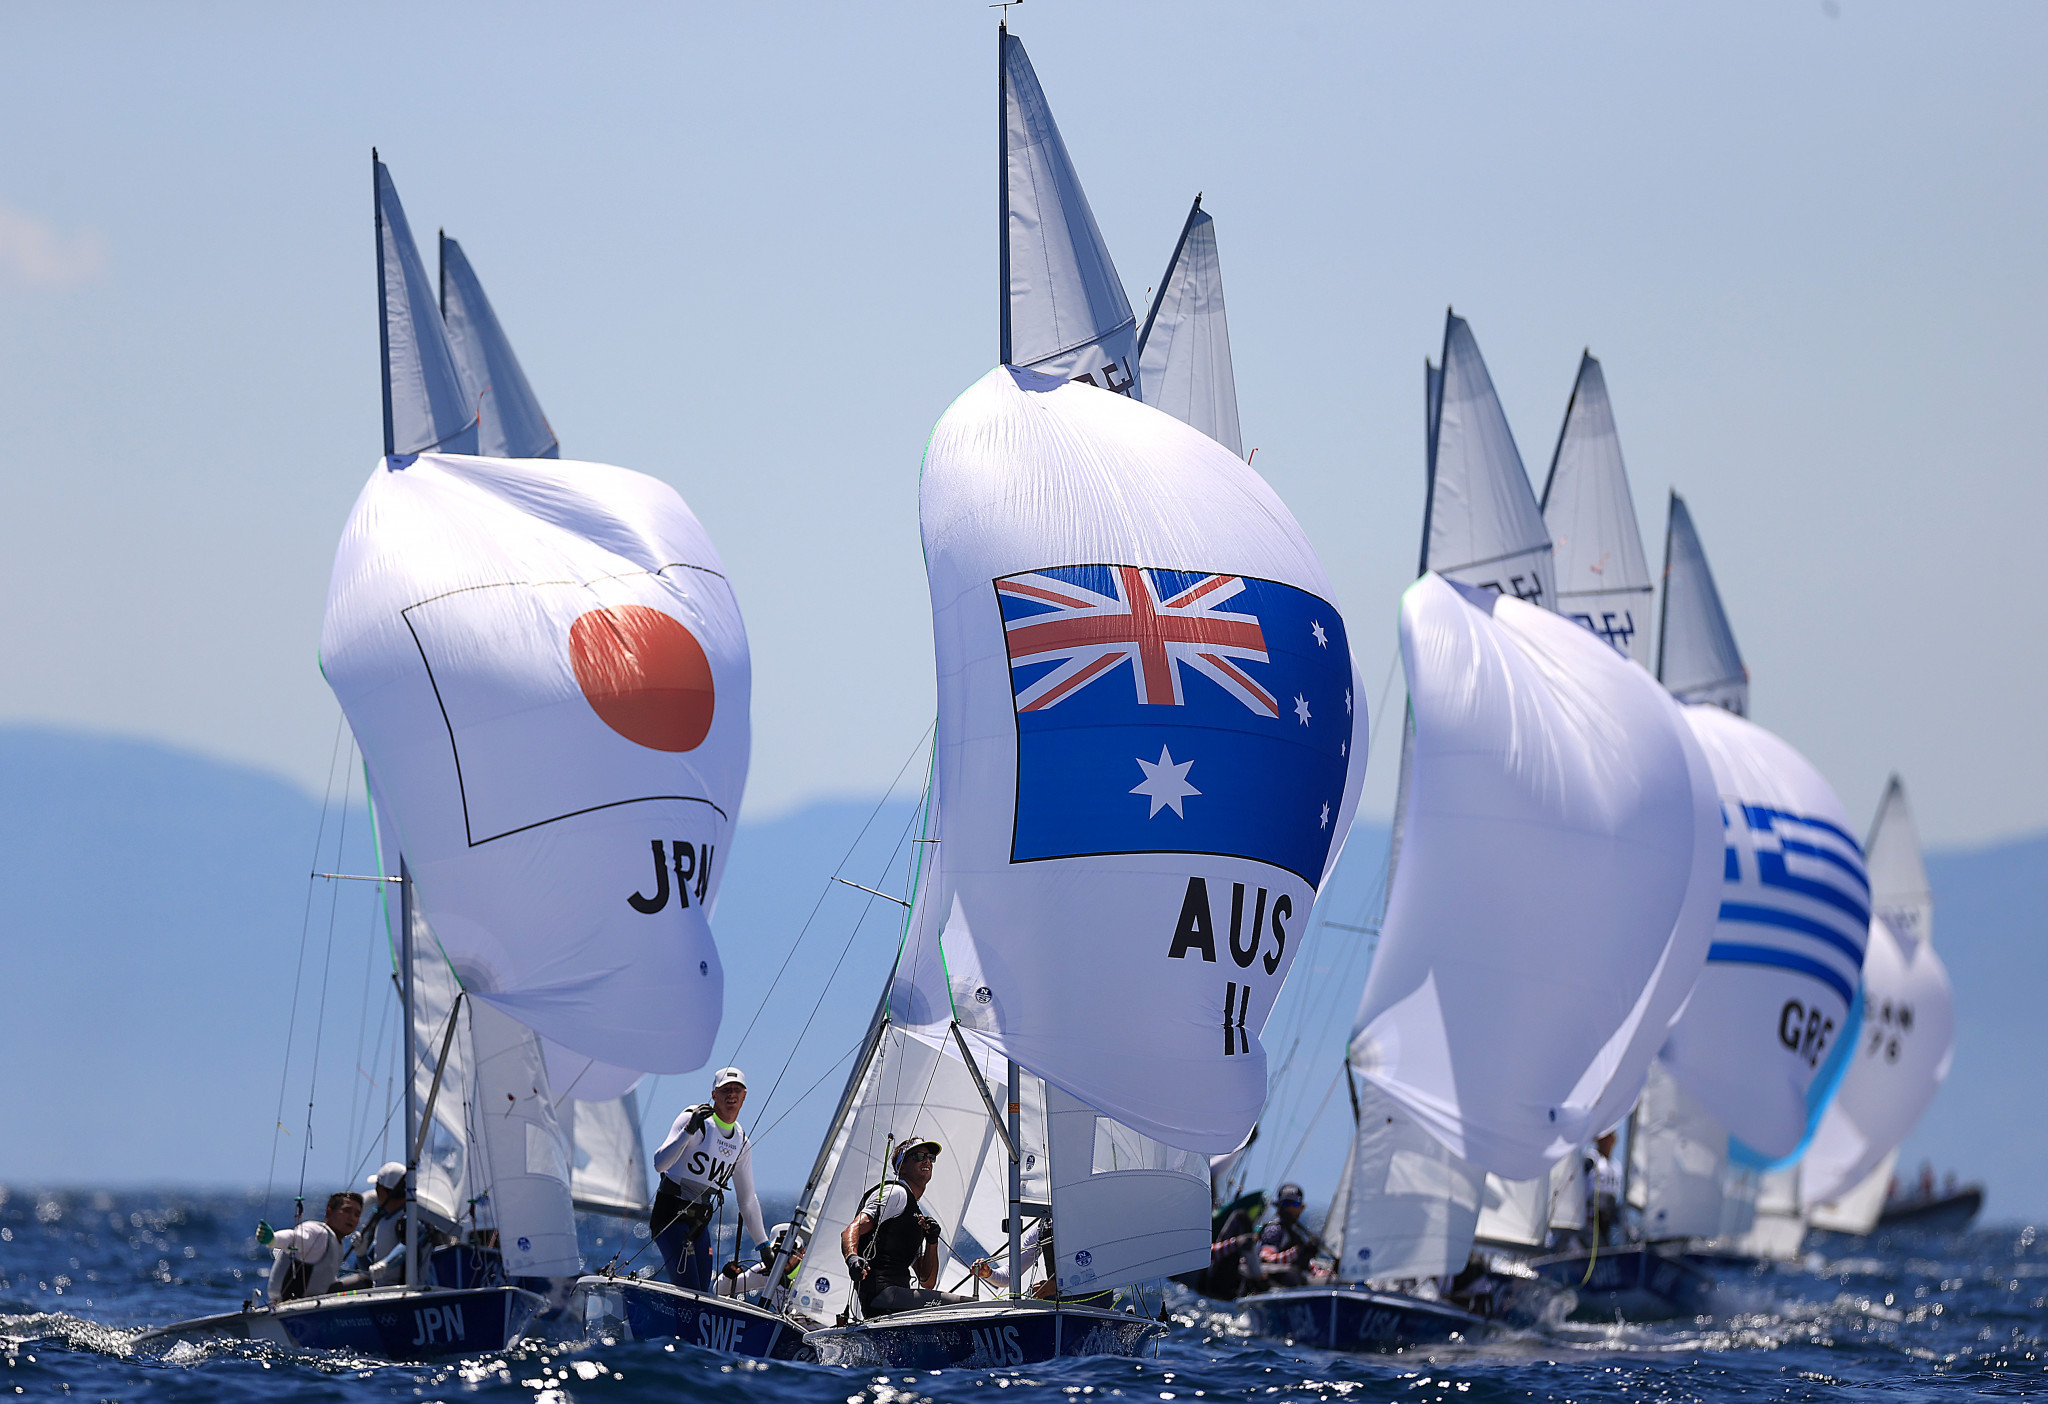 Málaga will host the 2023 World Sailing Annual Conference from November